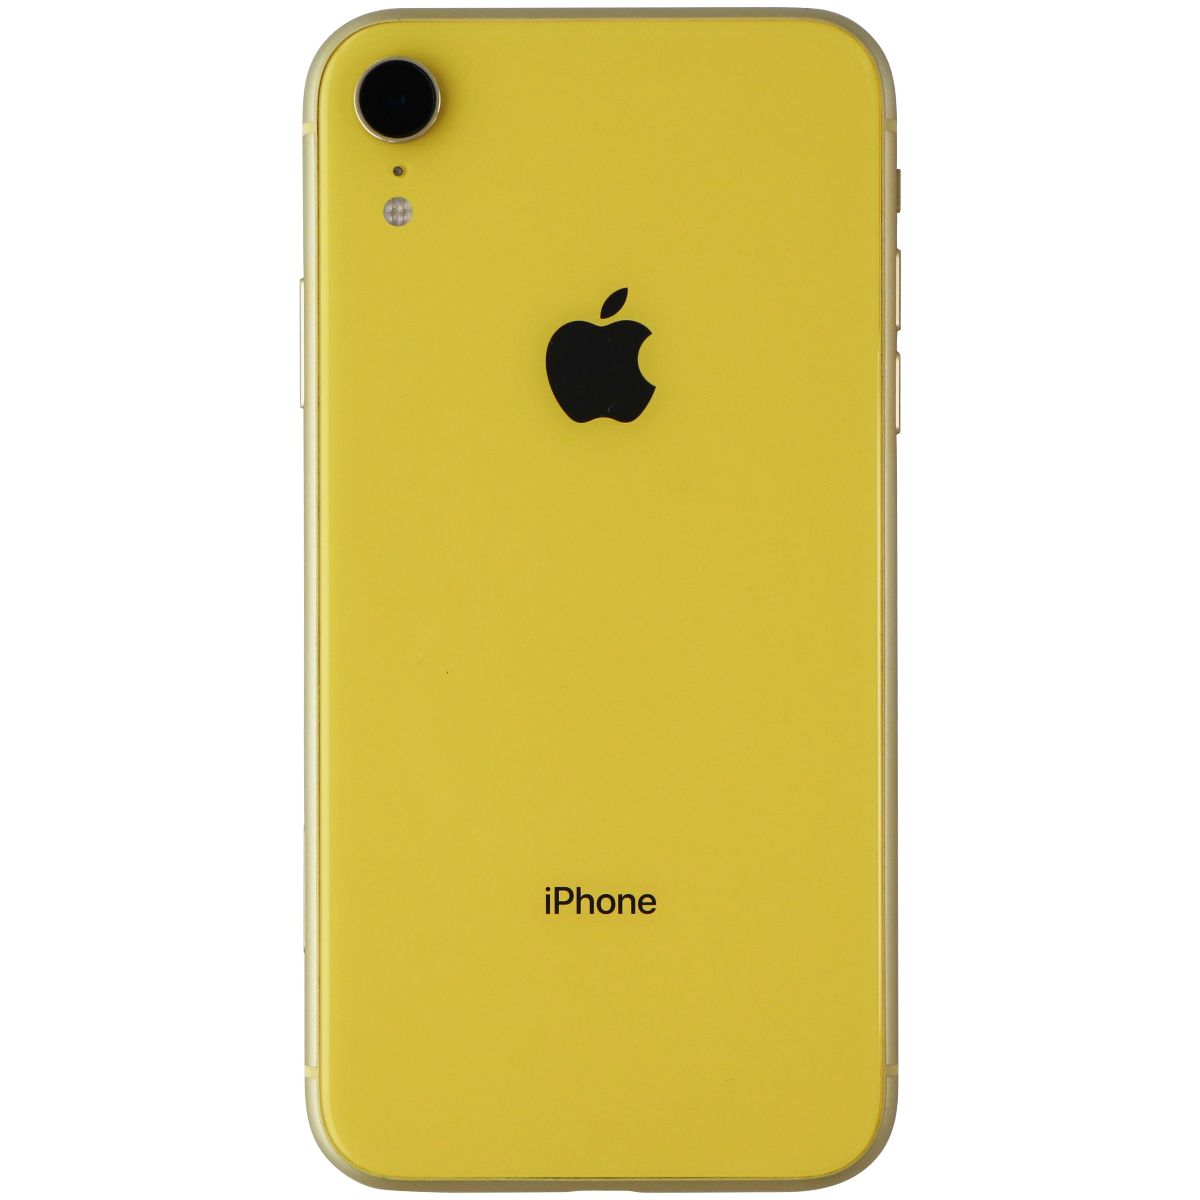 Apple iPhone XR (6.1-inch) (A1984) Unlocked - 64GB/Yellow BAD PROX SENSOR* Cell Phones & Smartphones Apple    - Simple Cell Bulk Wholesale Pricing - USA Seller